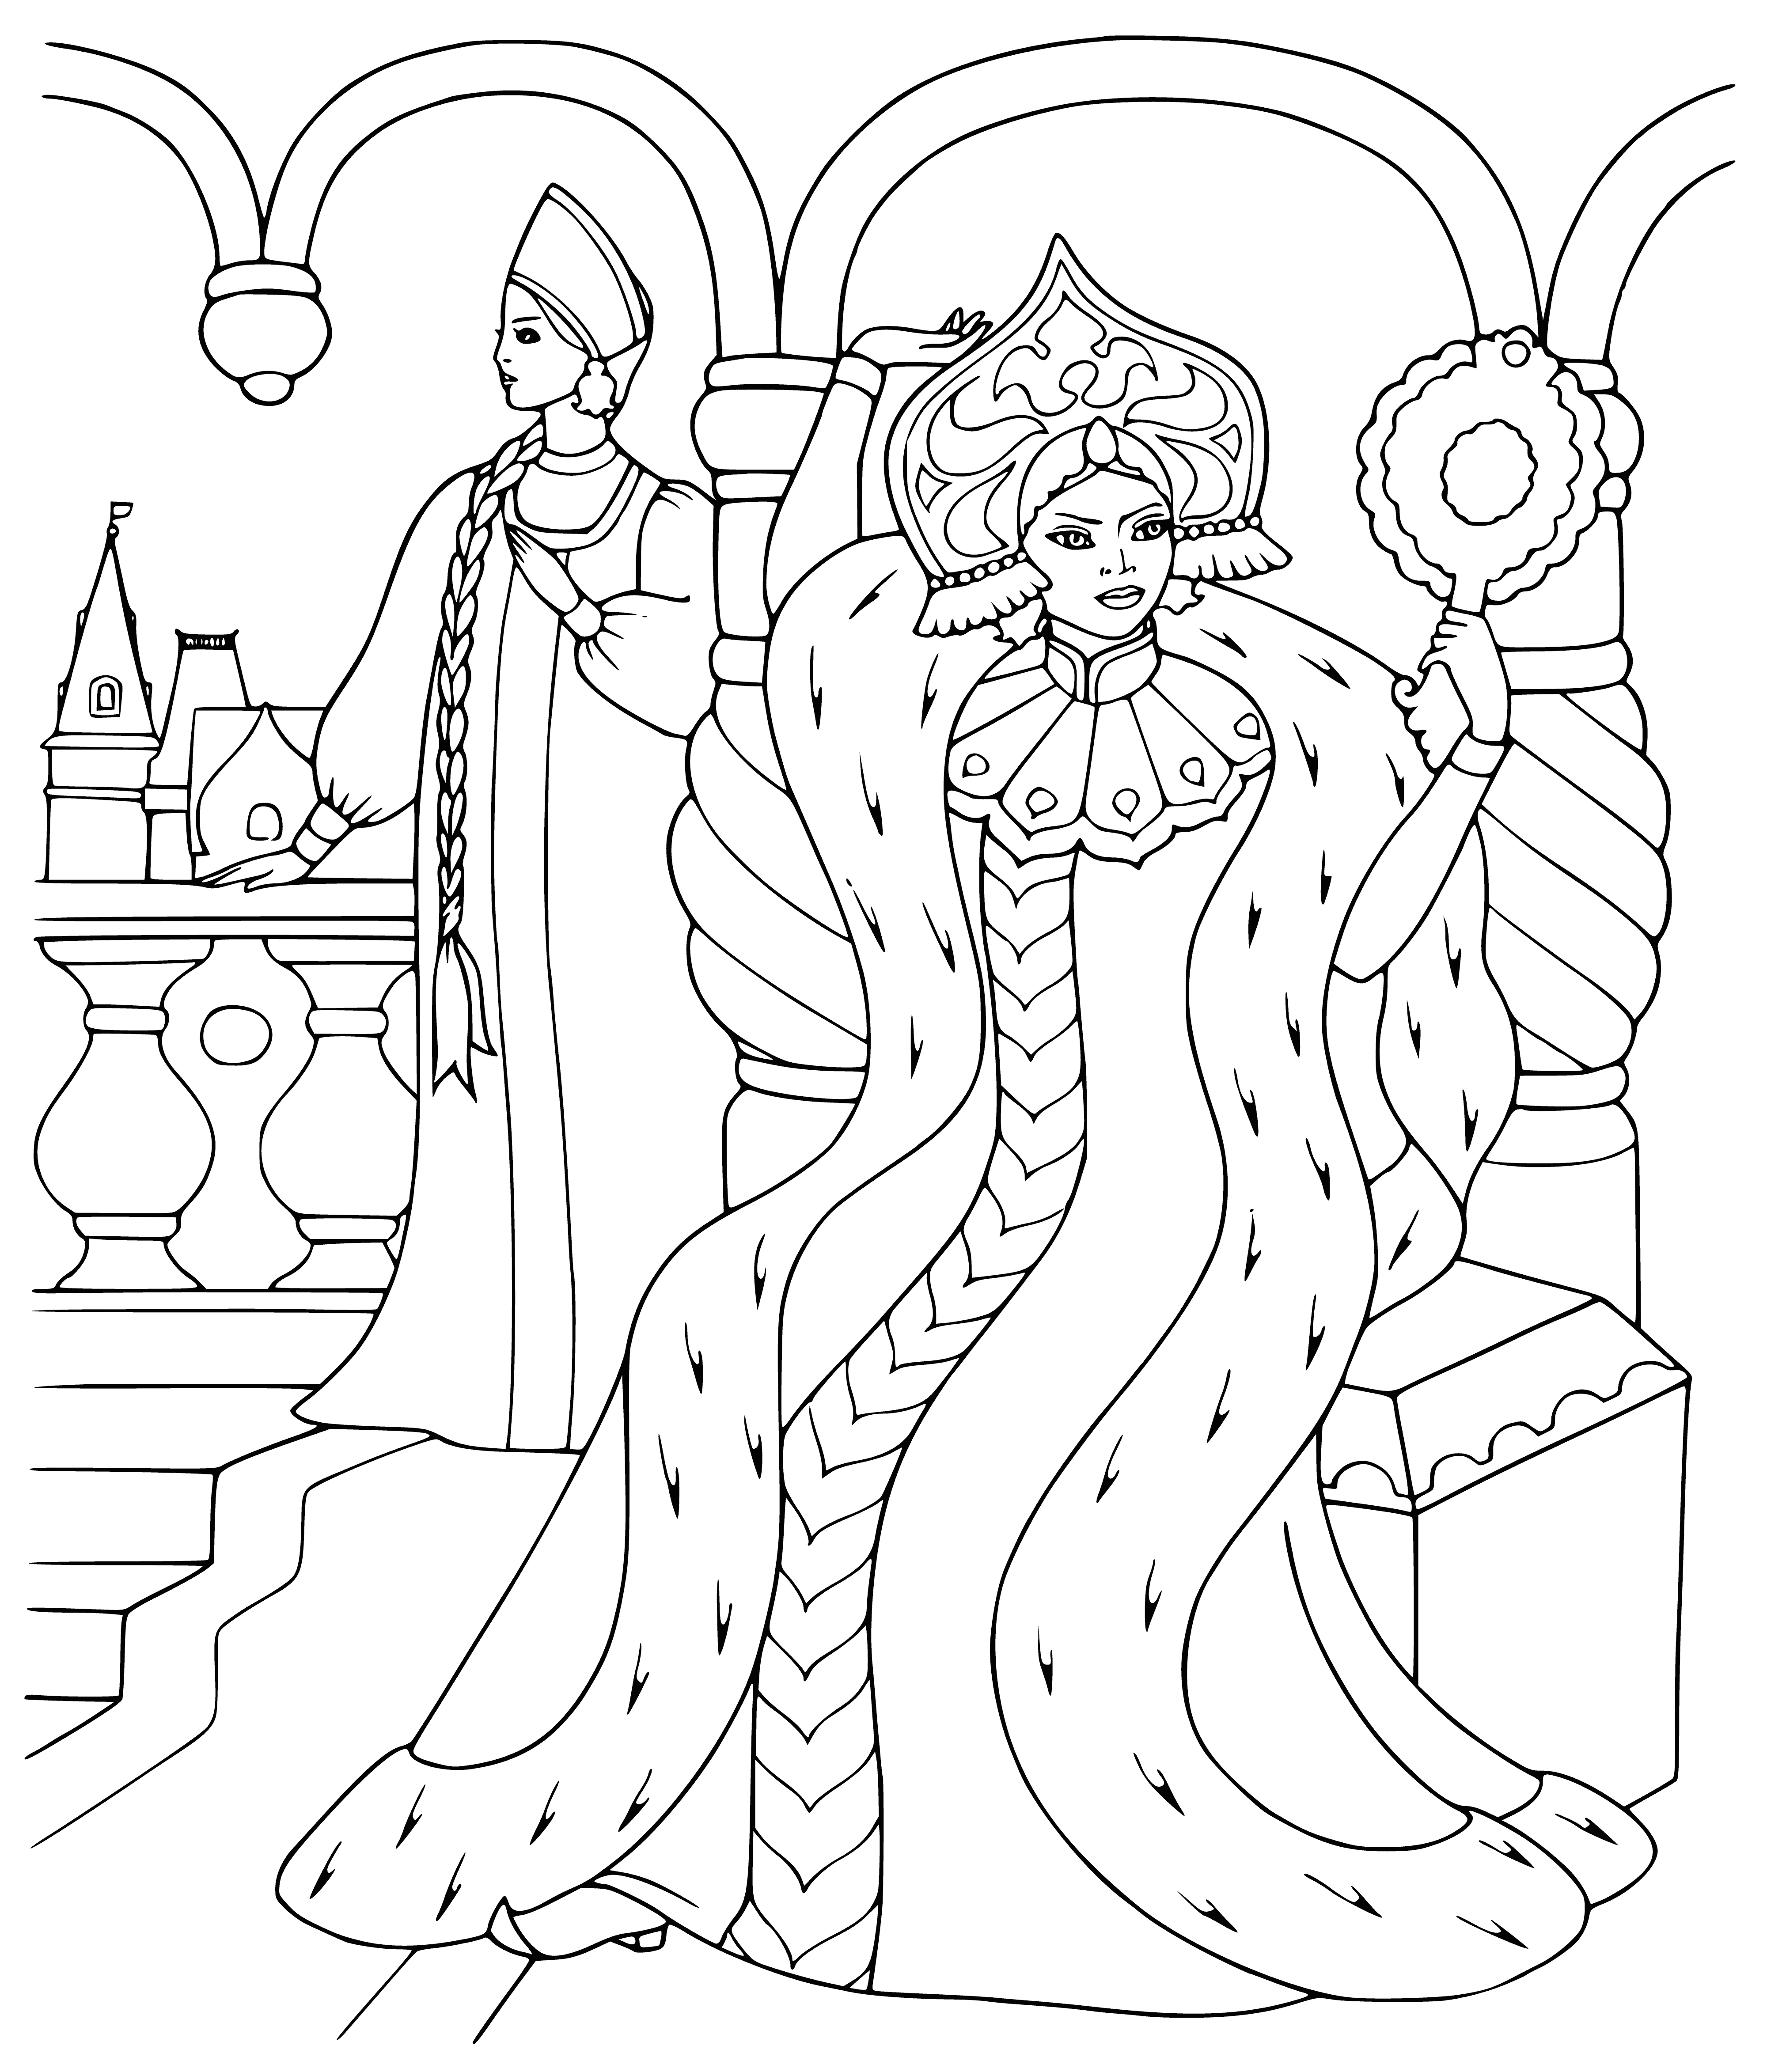 coloring page: Alexander Sergeevich Pushkin is kind, caring, an inspiration & incredible poet & writer, who puts others first & has inspired countless.